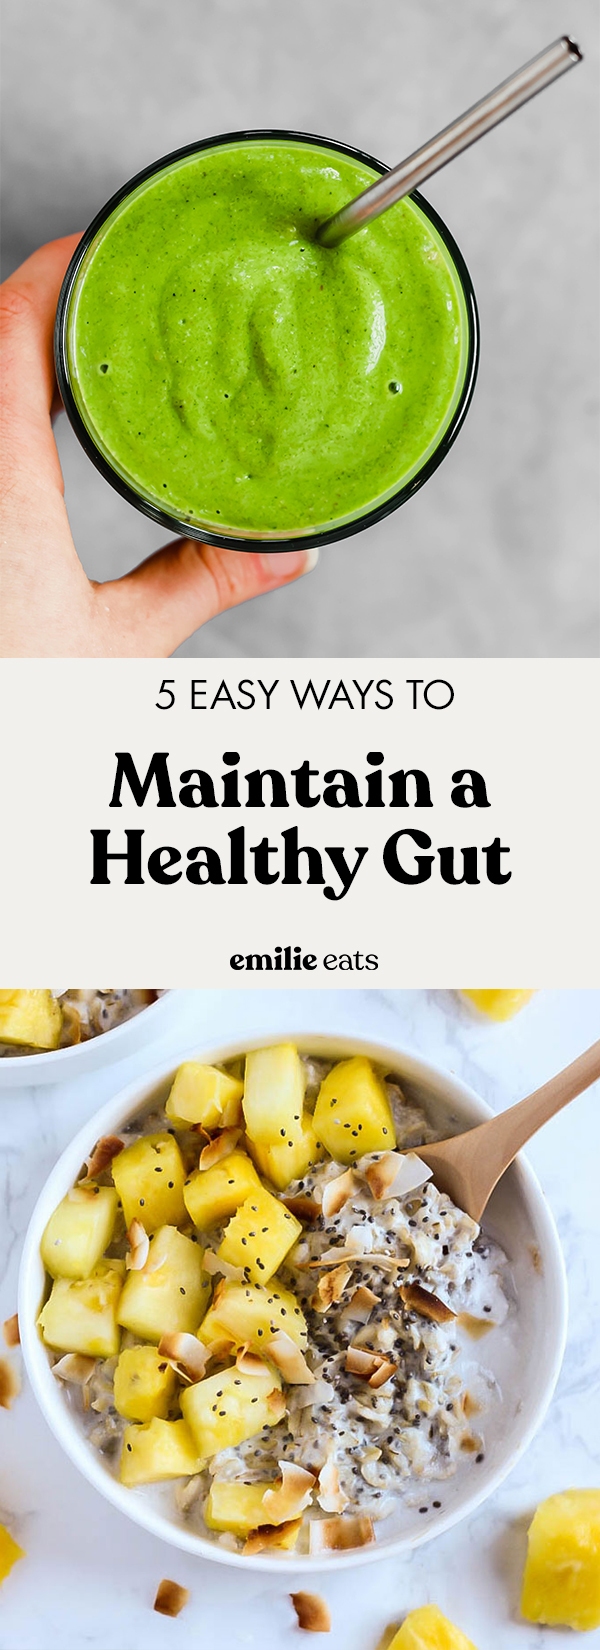 Keeping your gut healthy doesn’t have to be difficult or expensive! Here are 5 easy ways to maintain a healthy gut in your everyday life.